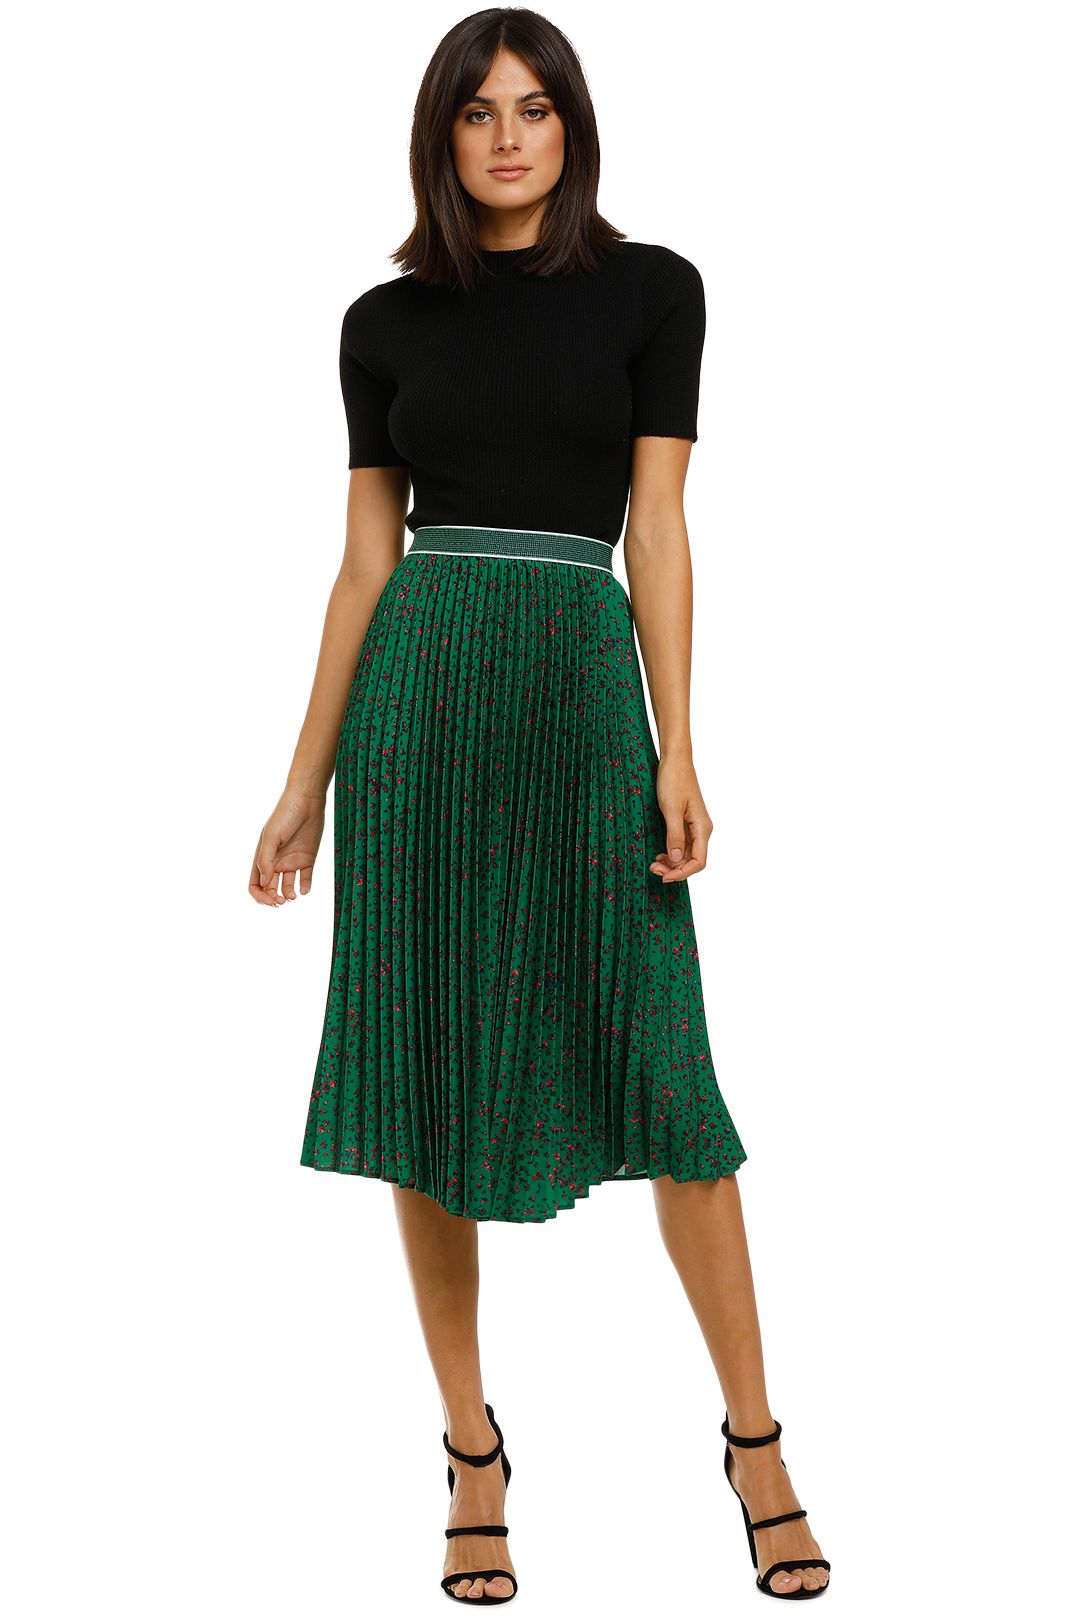 Curate-by-Trelise-Cooper-Side-Pleat-Skirt-Green-Front